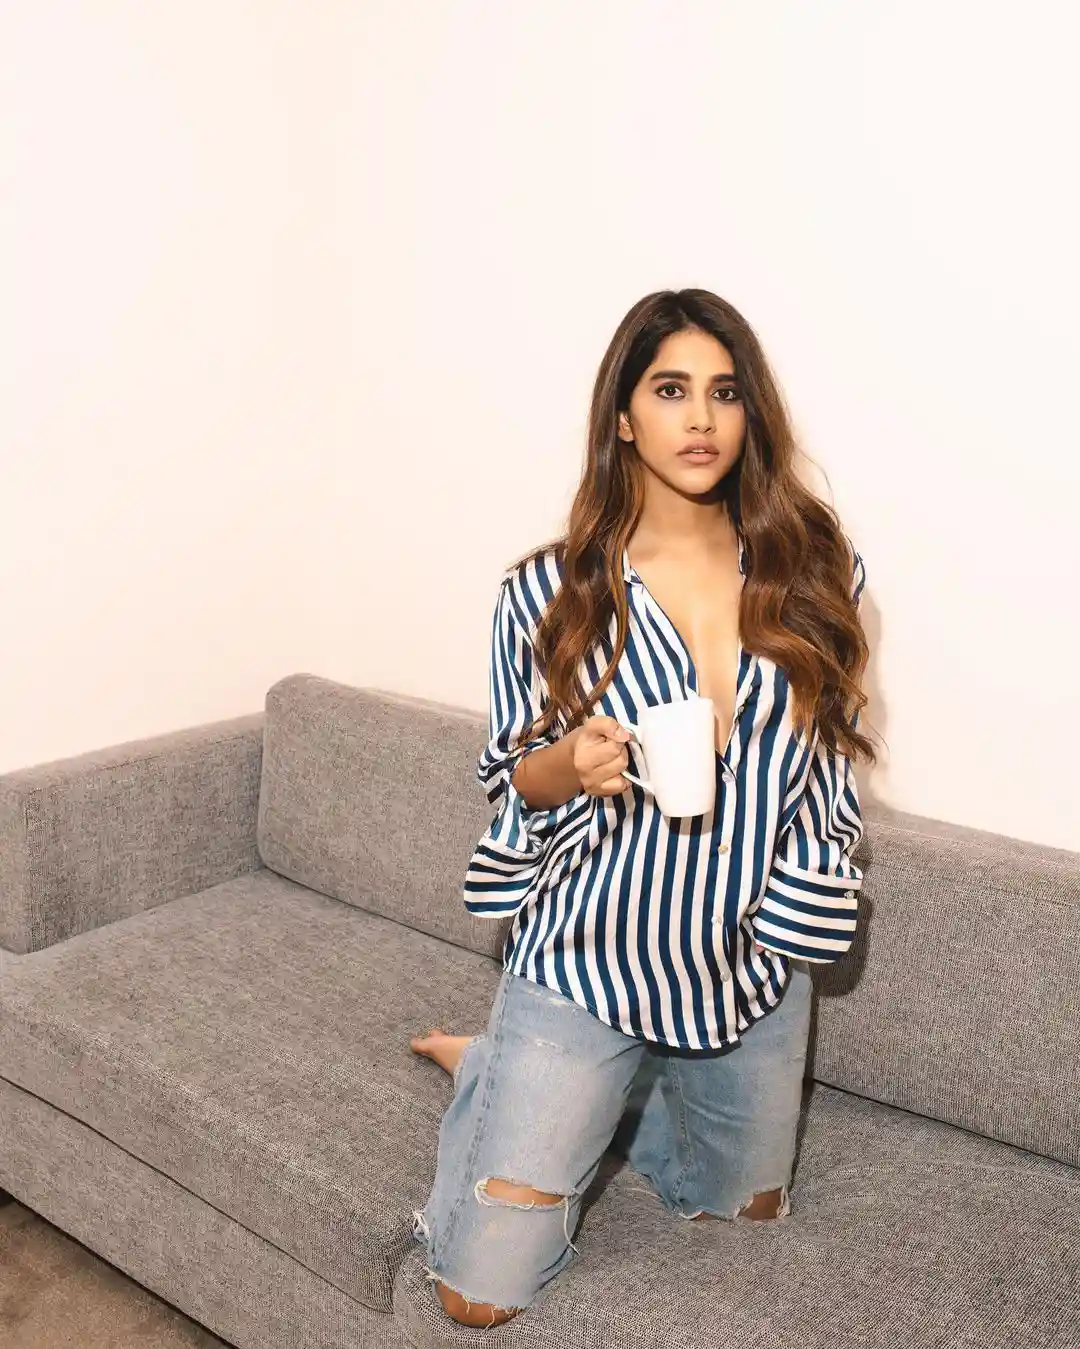 Nabha Natesh Stylish looks with coffee cup in Modern outfit  